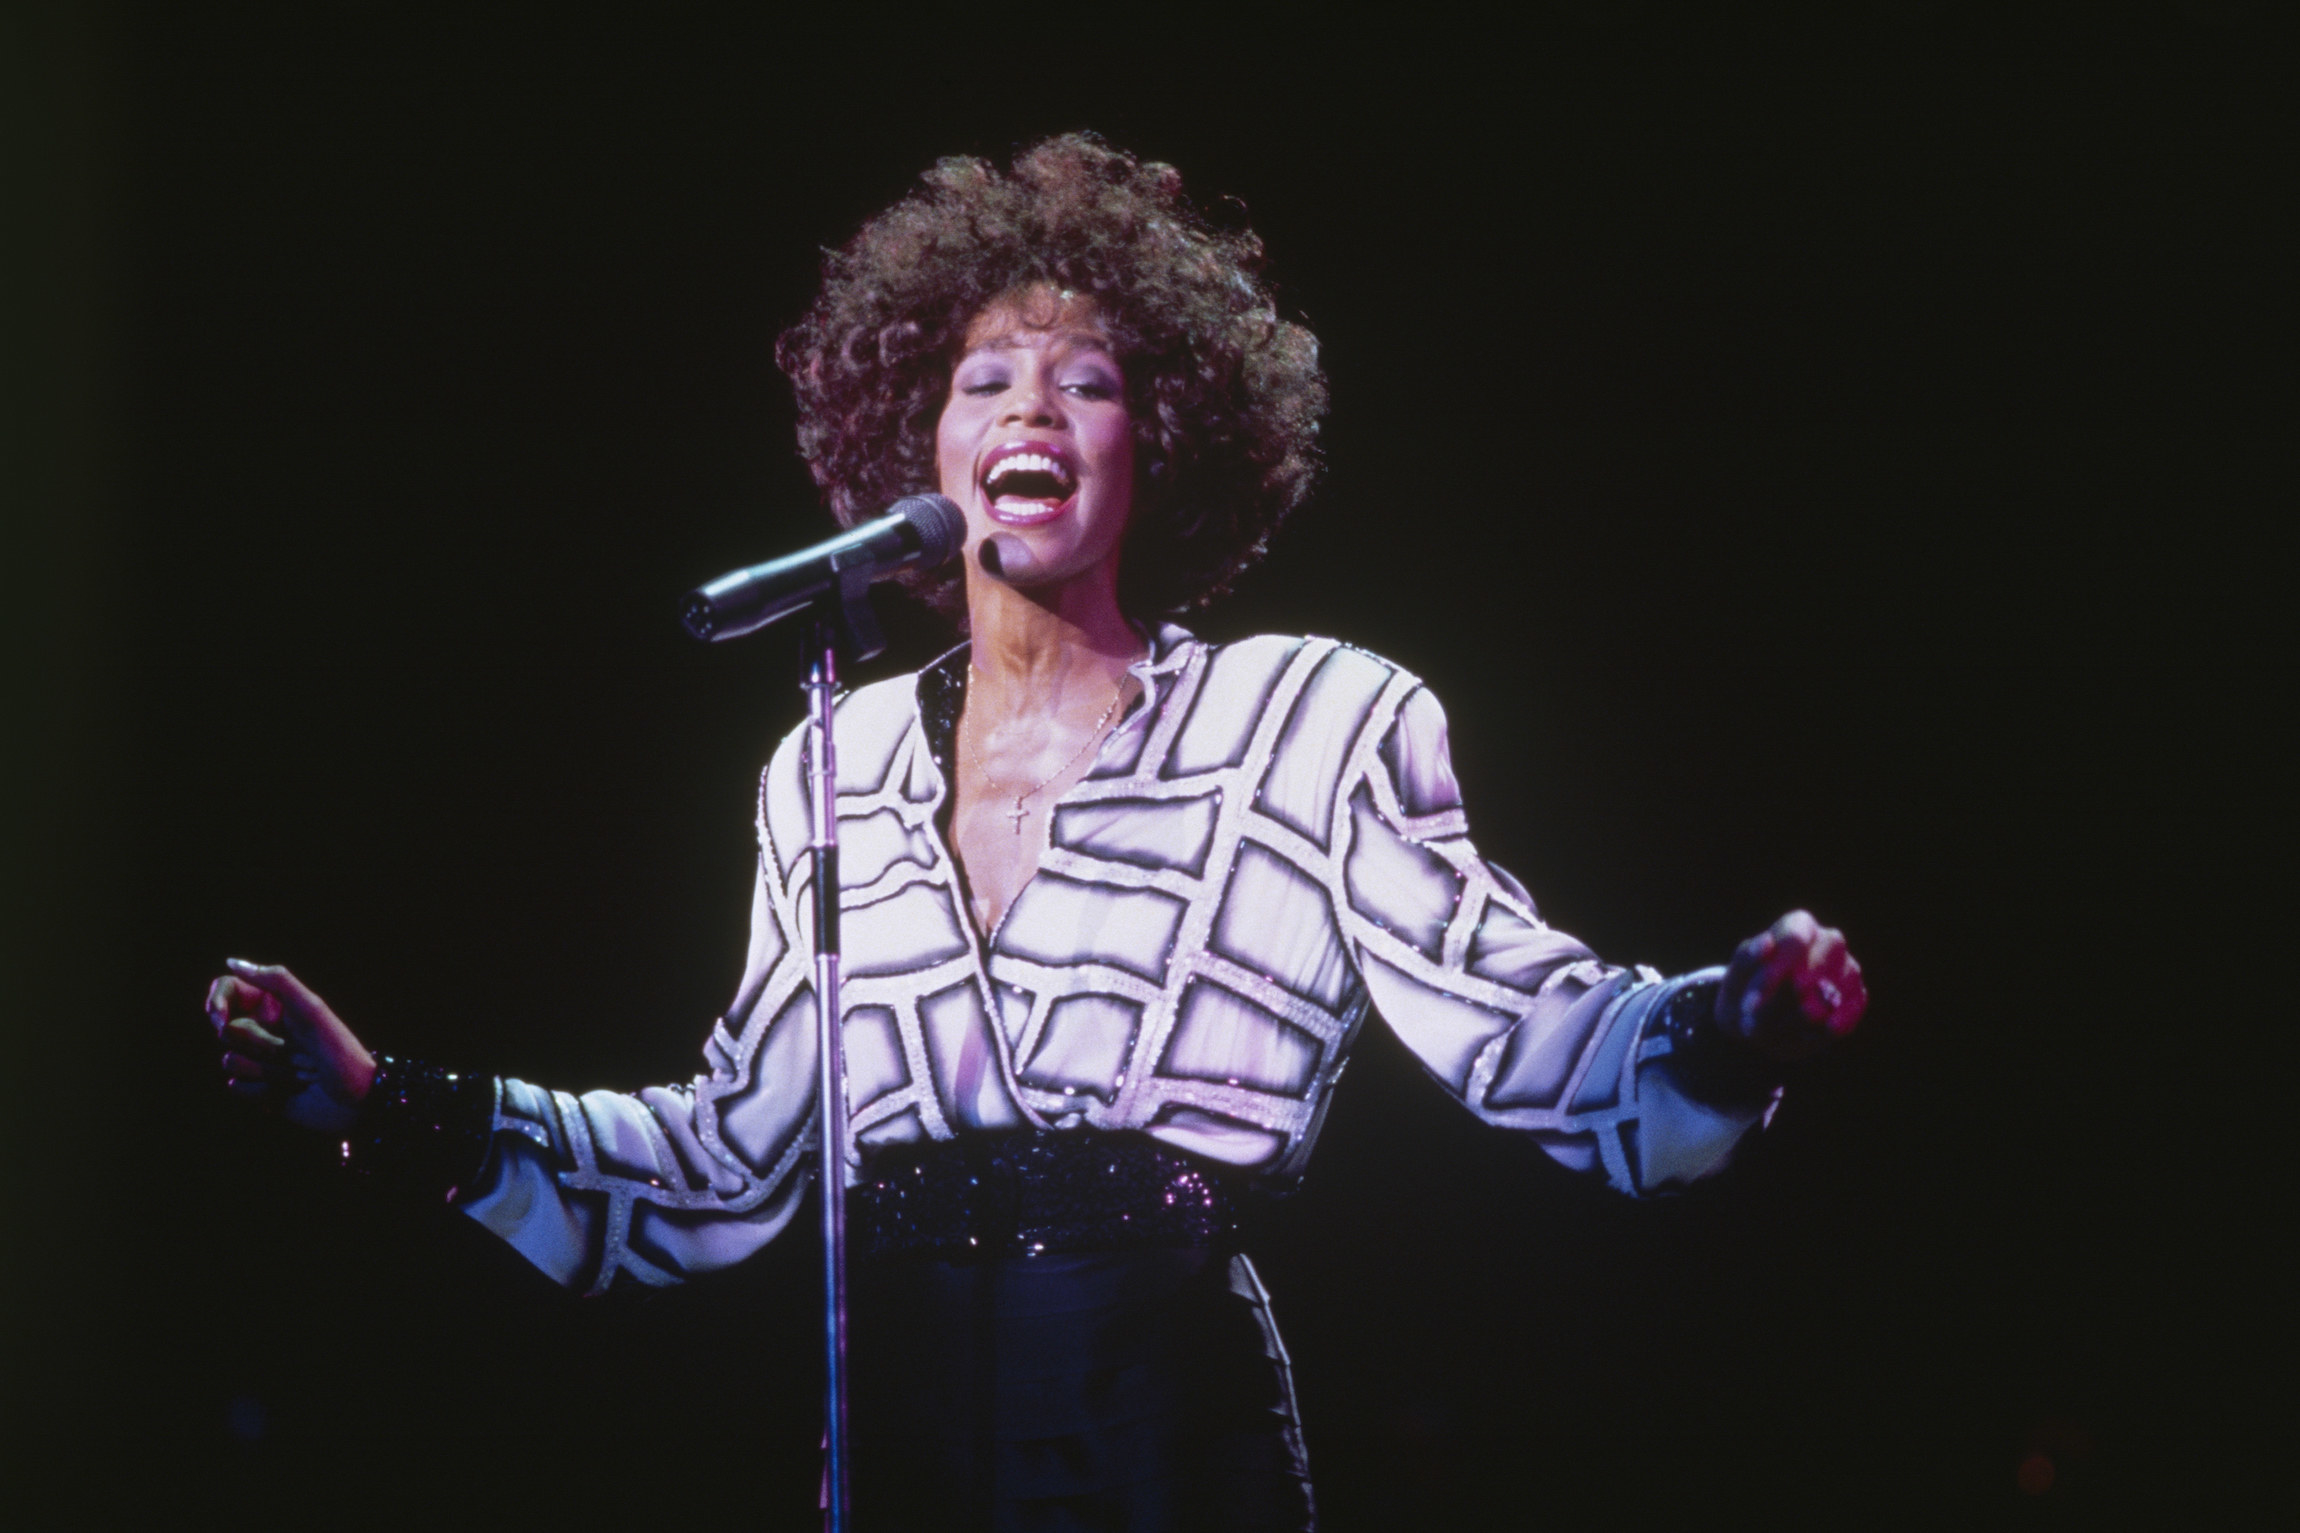 American Singer Whitney Houston on Stage